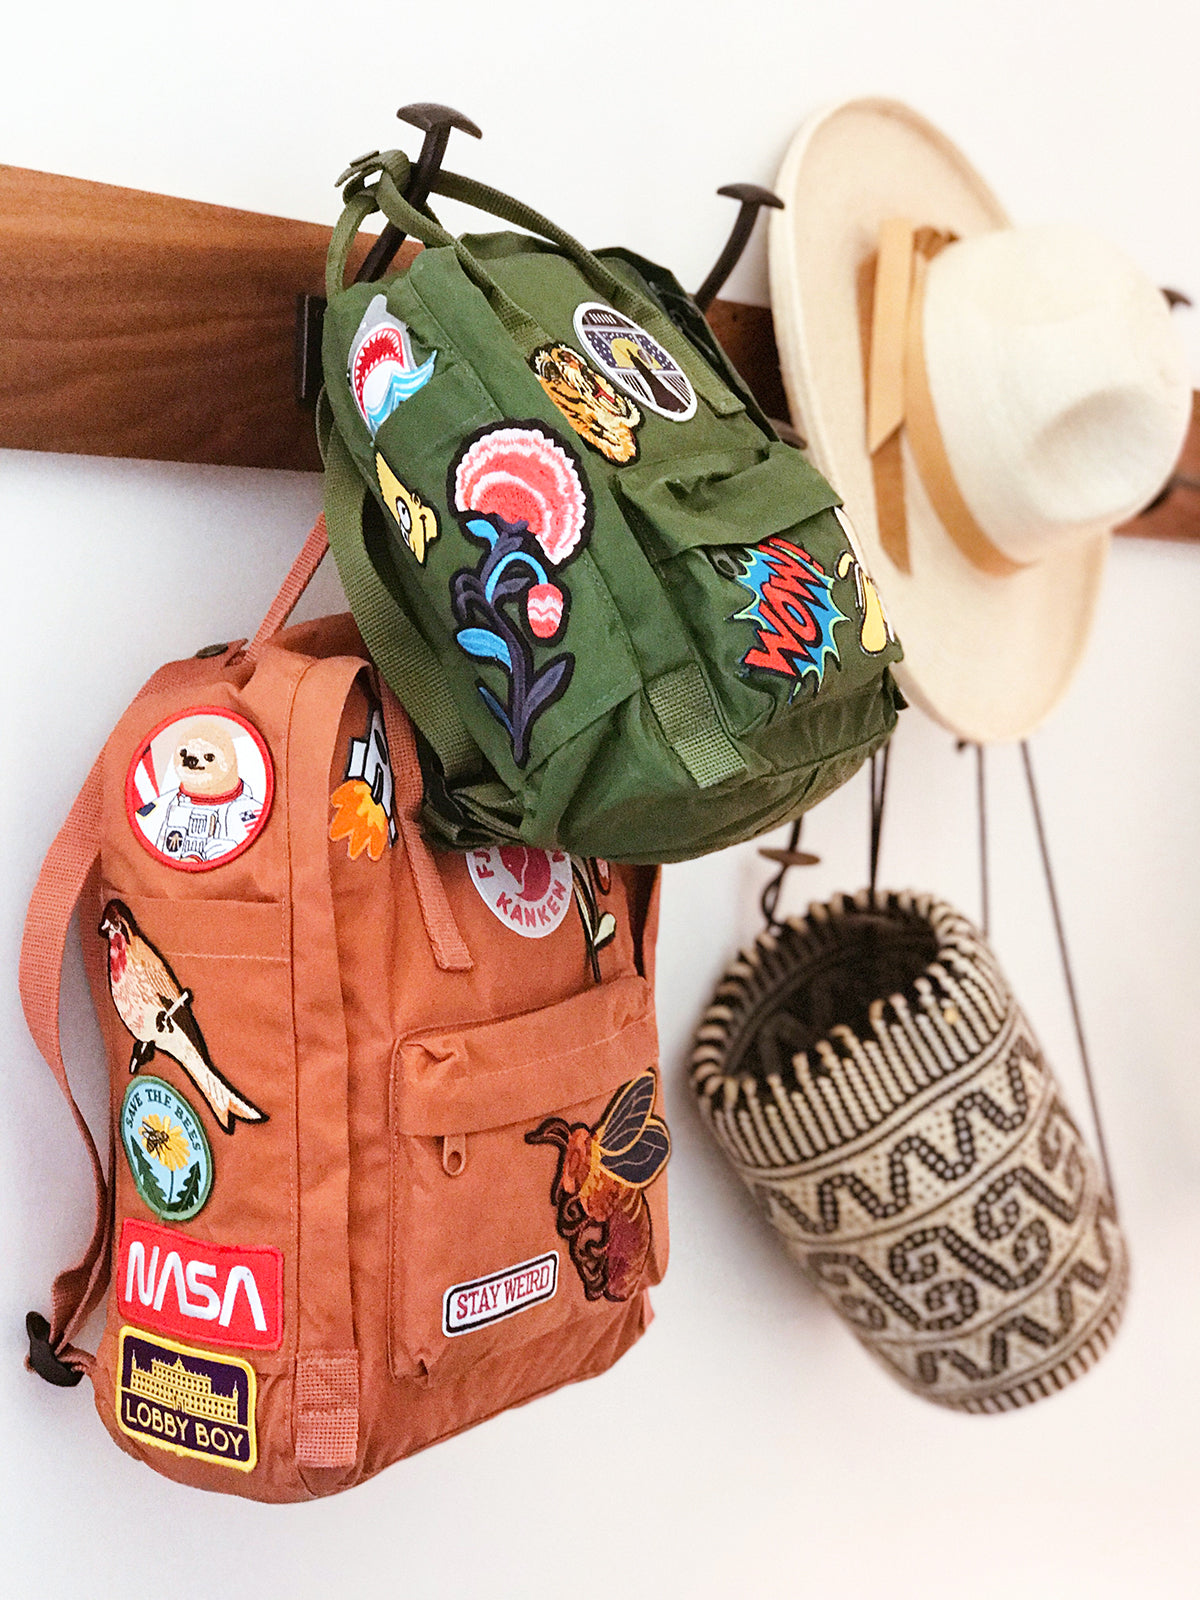 3 different backpacks with different types of patches attached